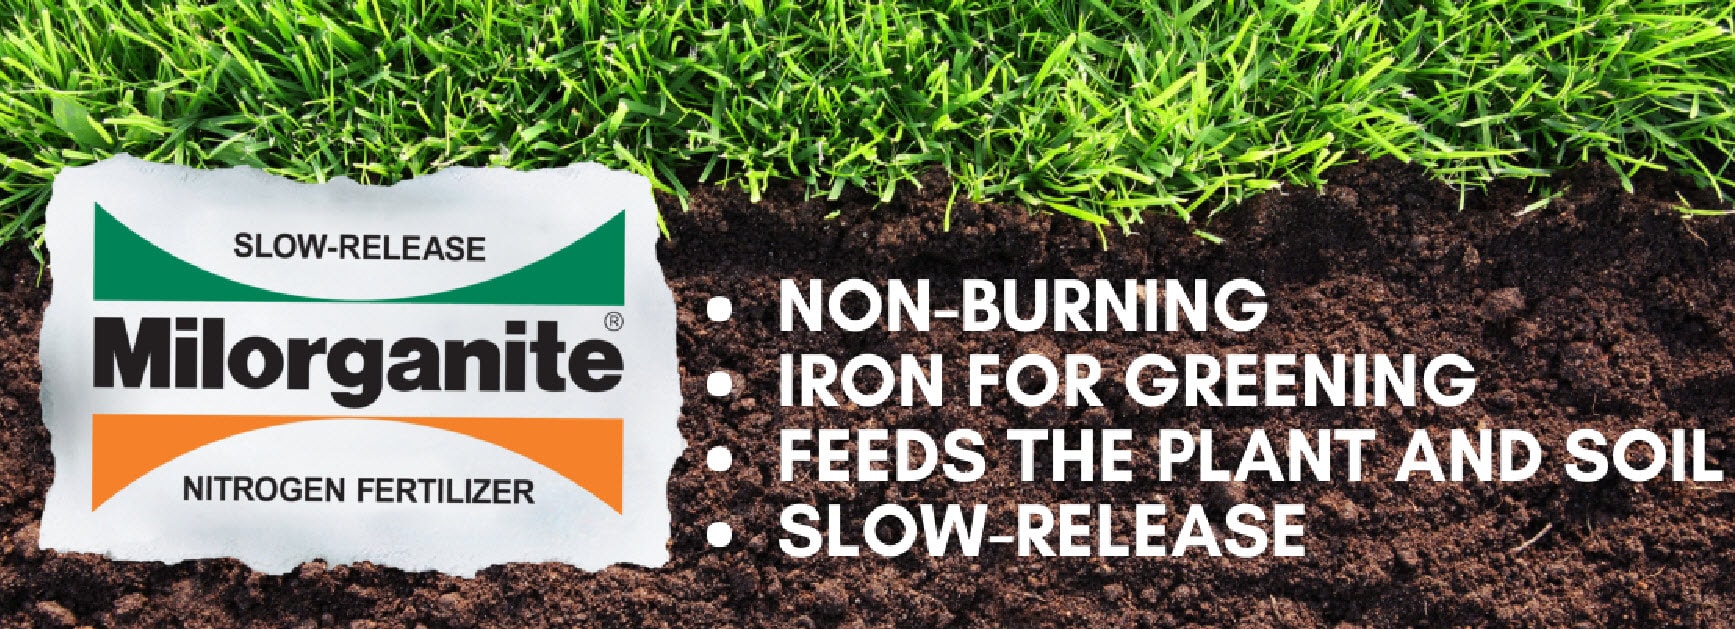 Milorganite fertilizer is made from slow-release nitrogen and feeds for up to ten weeks. 